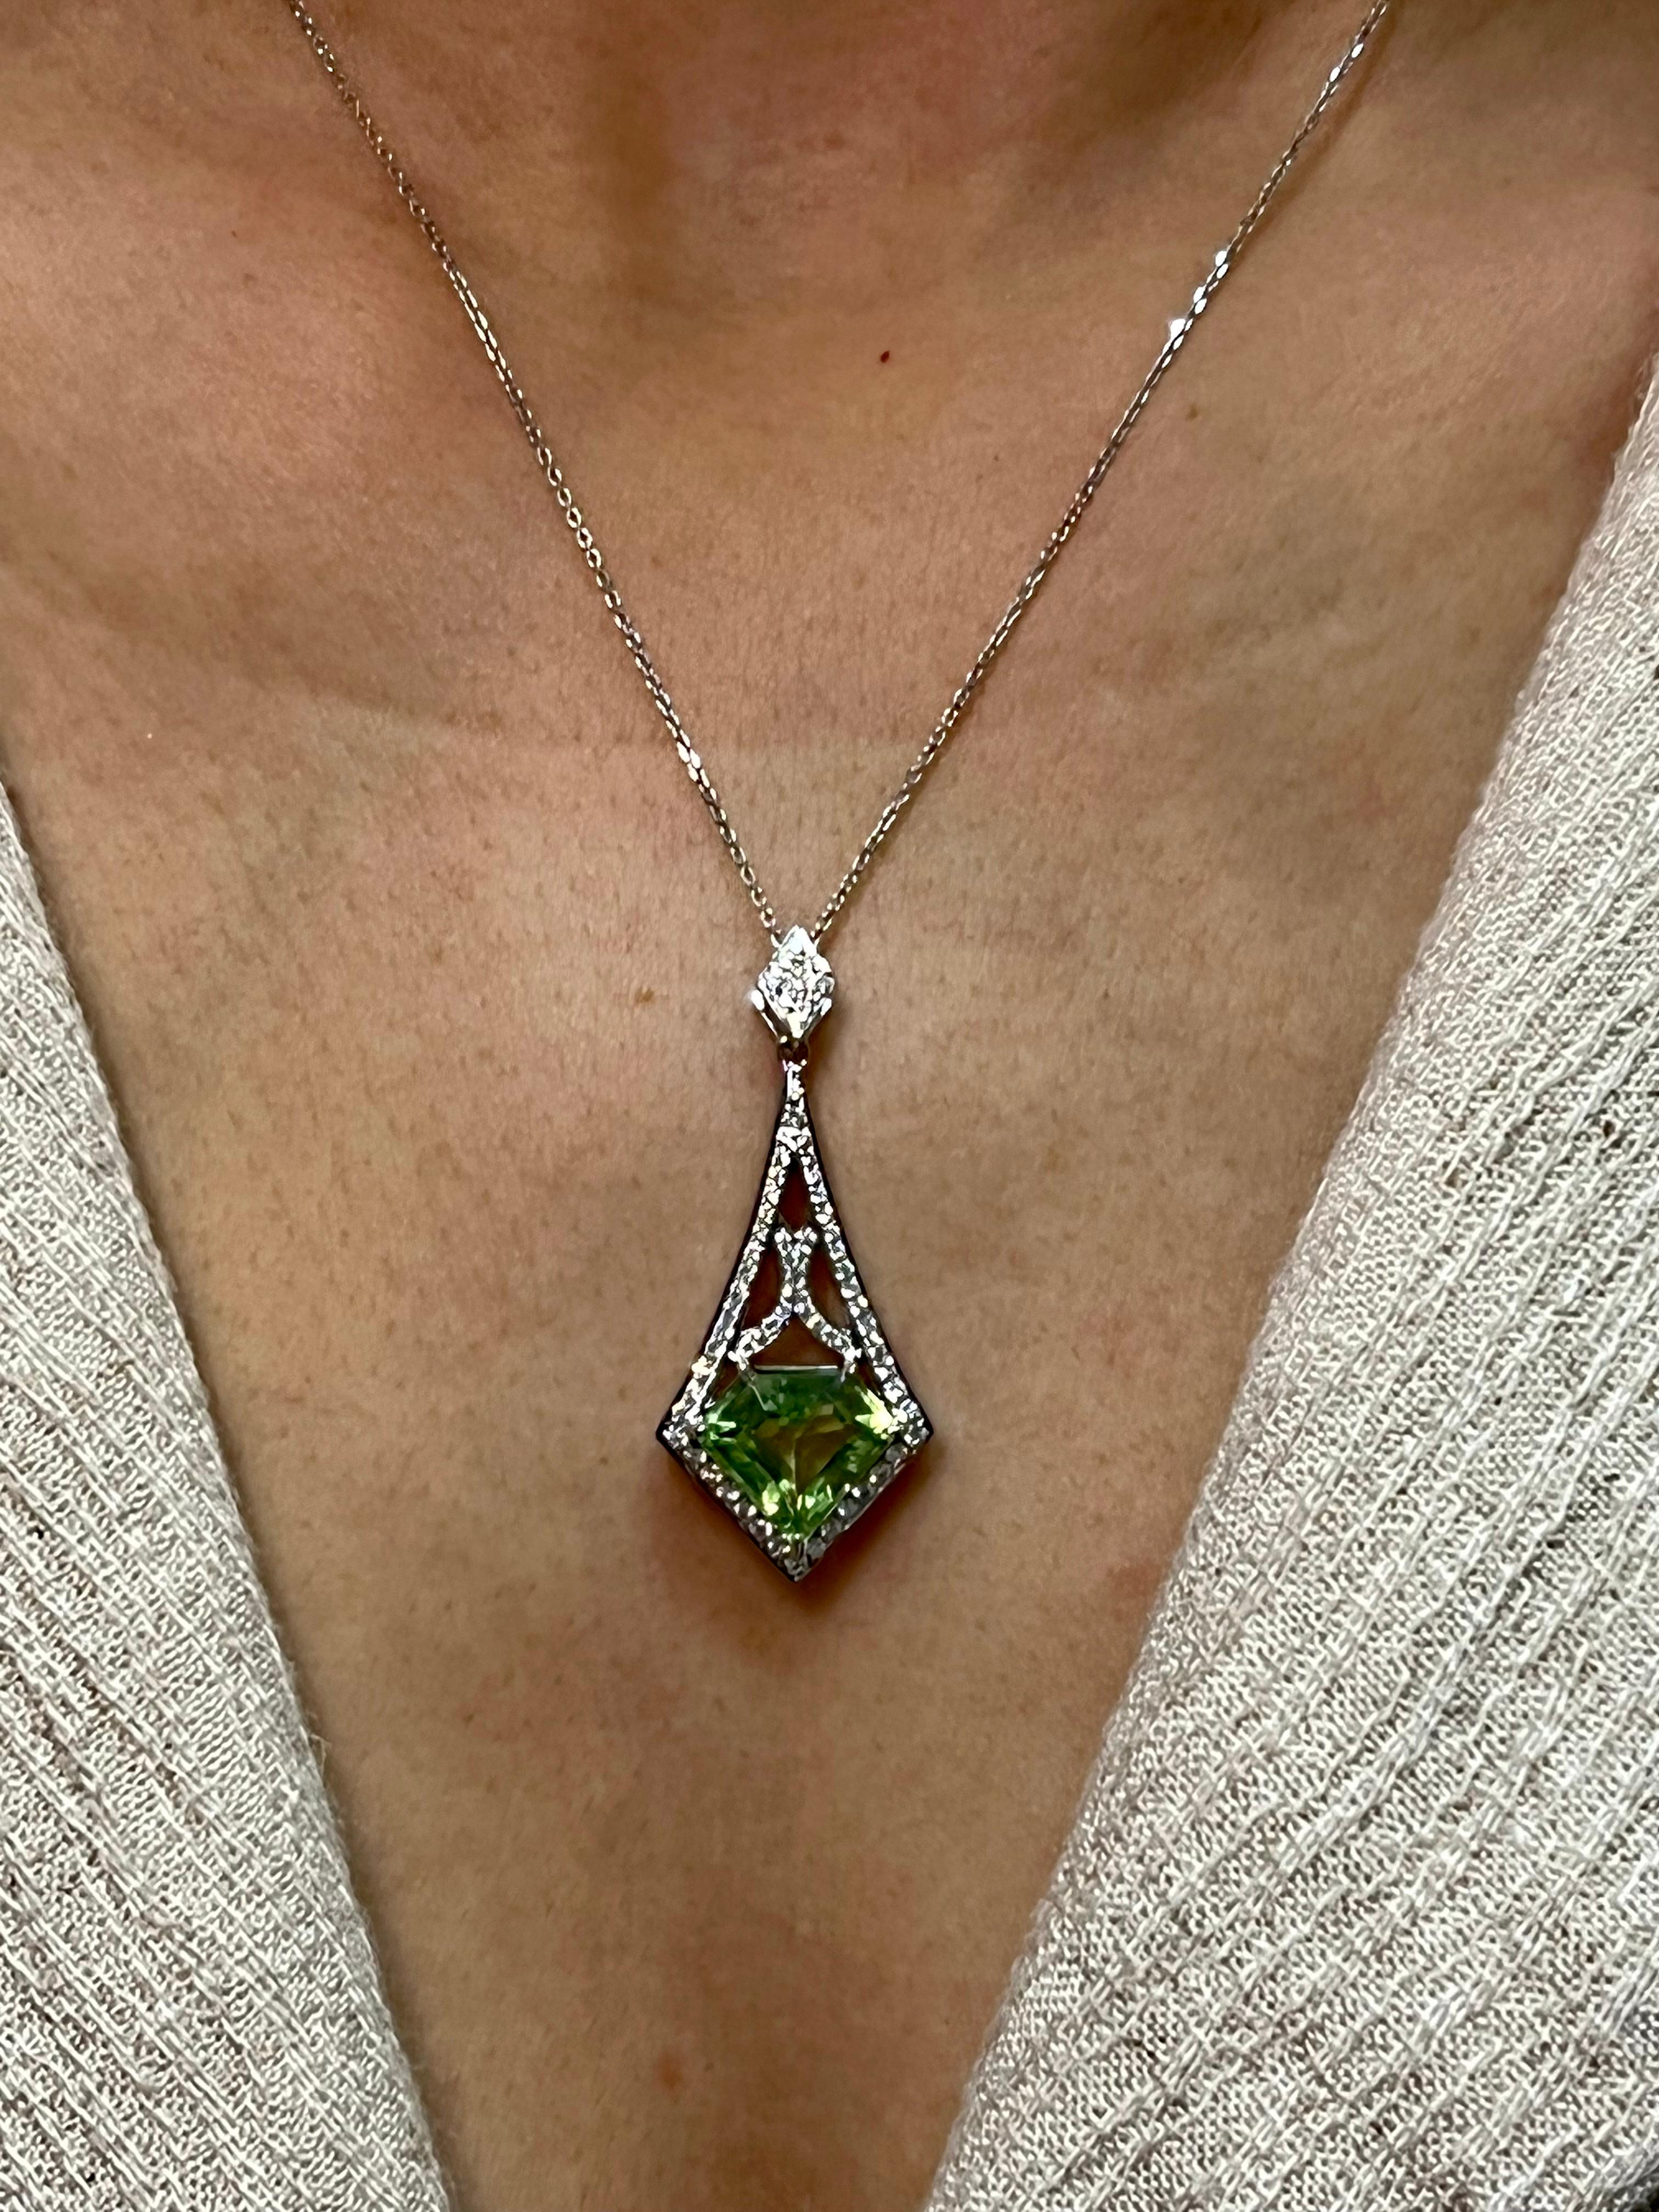 Please check out the HD video. This is a versatile piece of jewelry made with a top notch gem peridot. You can wear this pendant dressed up or down. The green peridot pendant is made of 18k white gold and diamonds. There is one larger natural